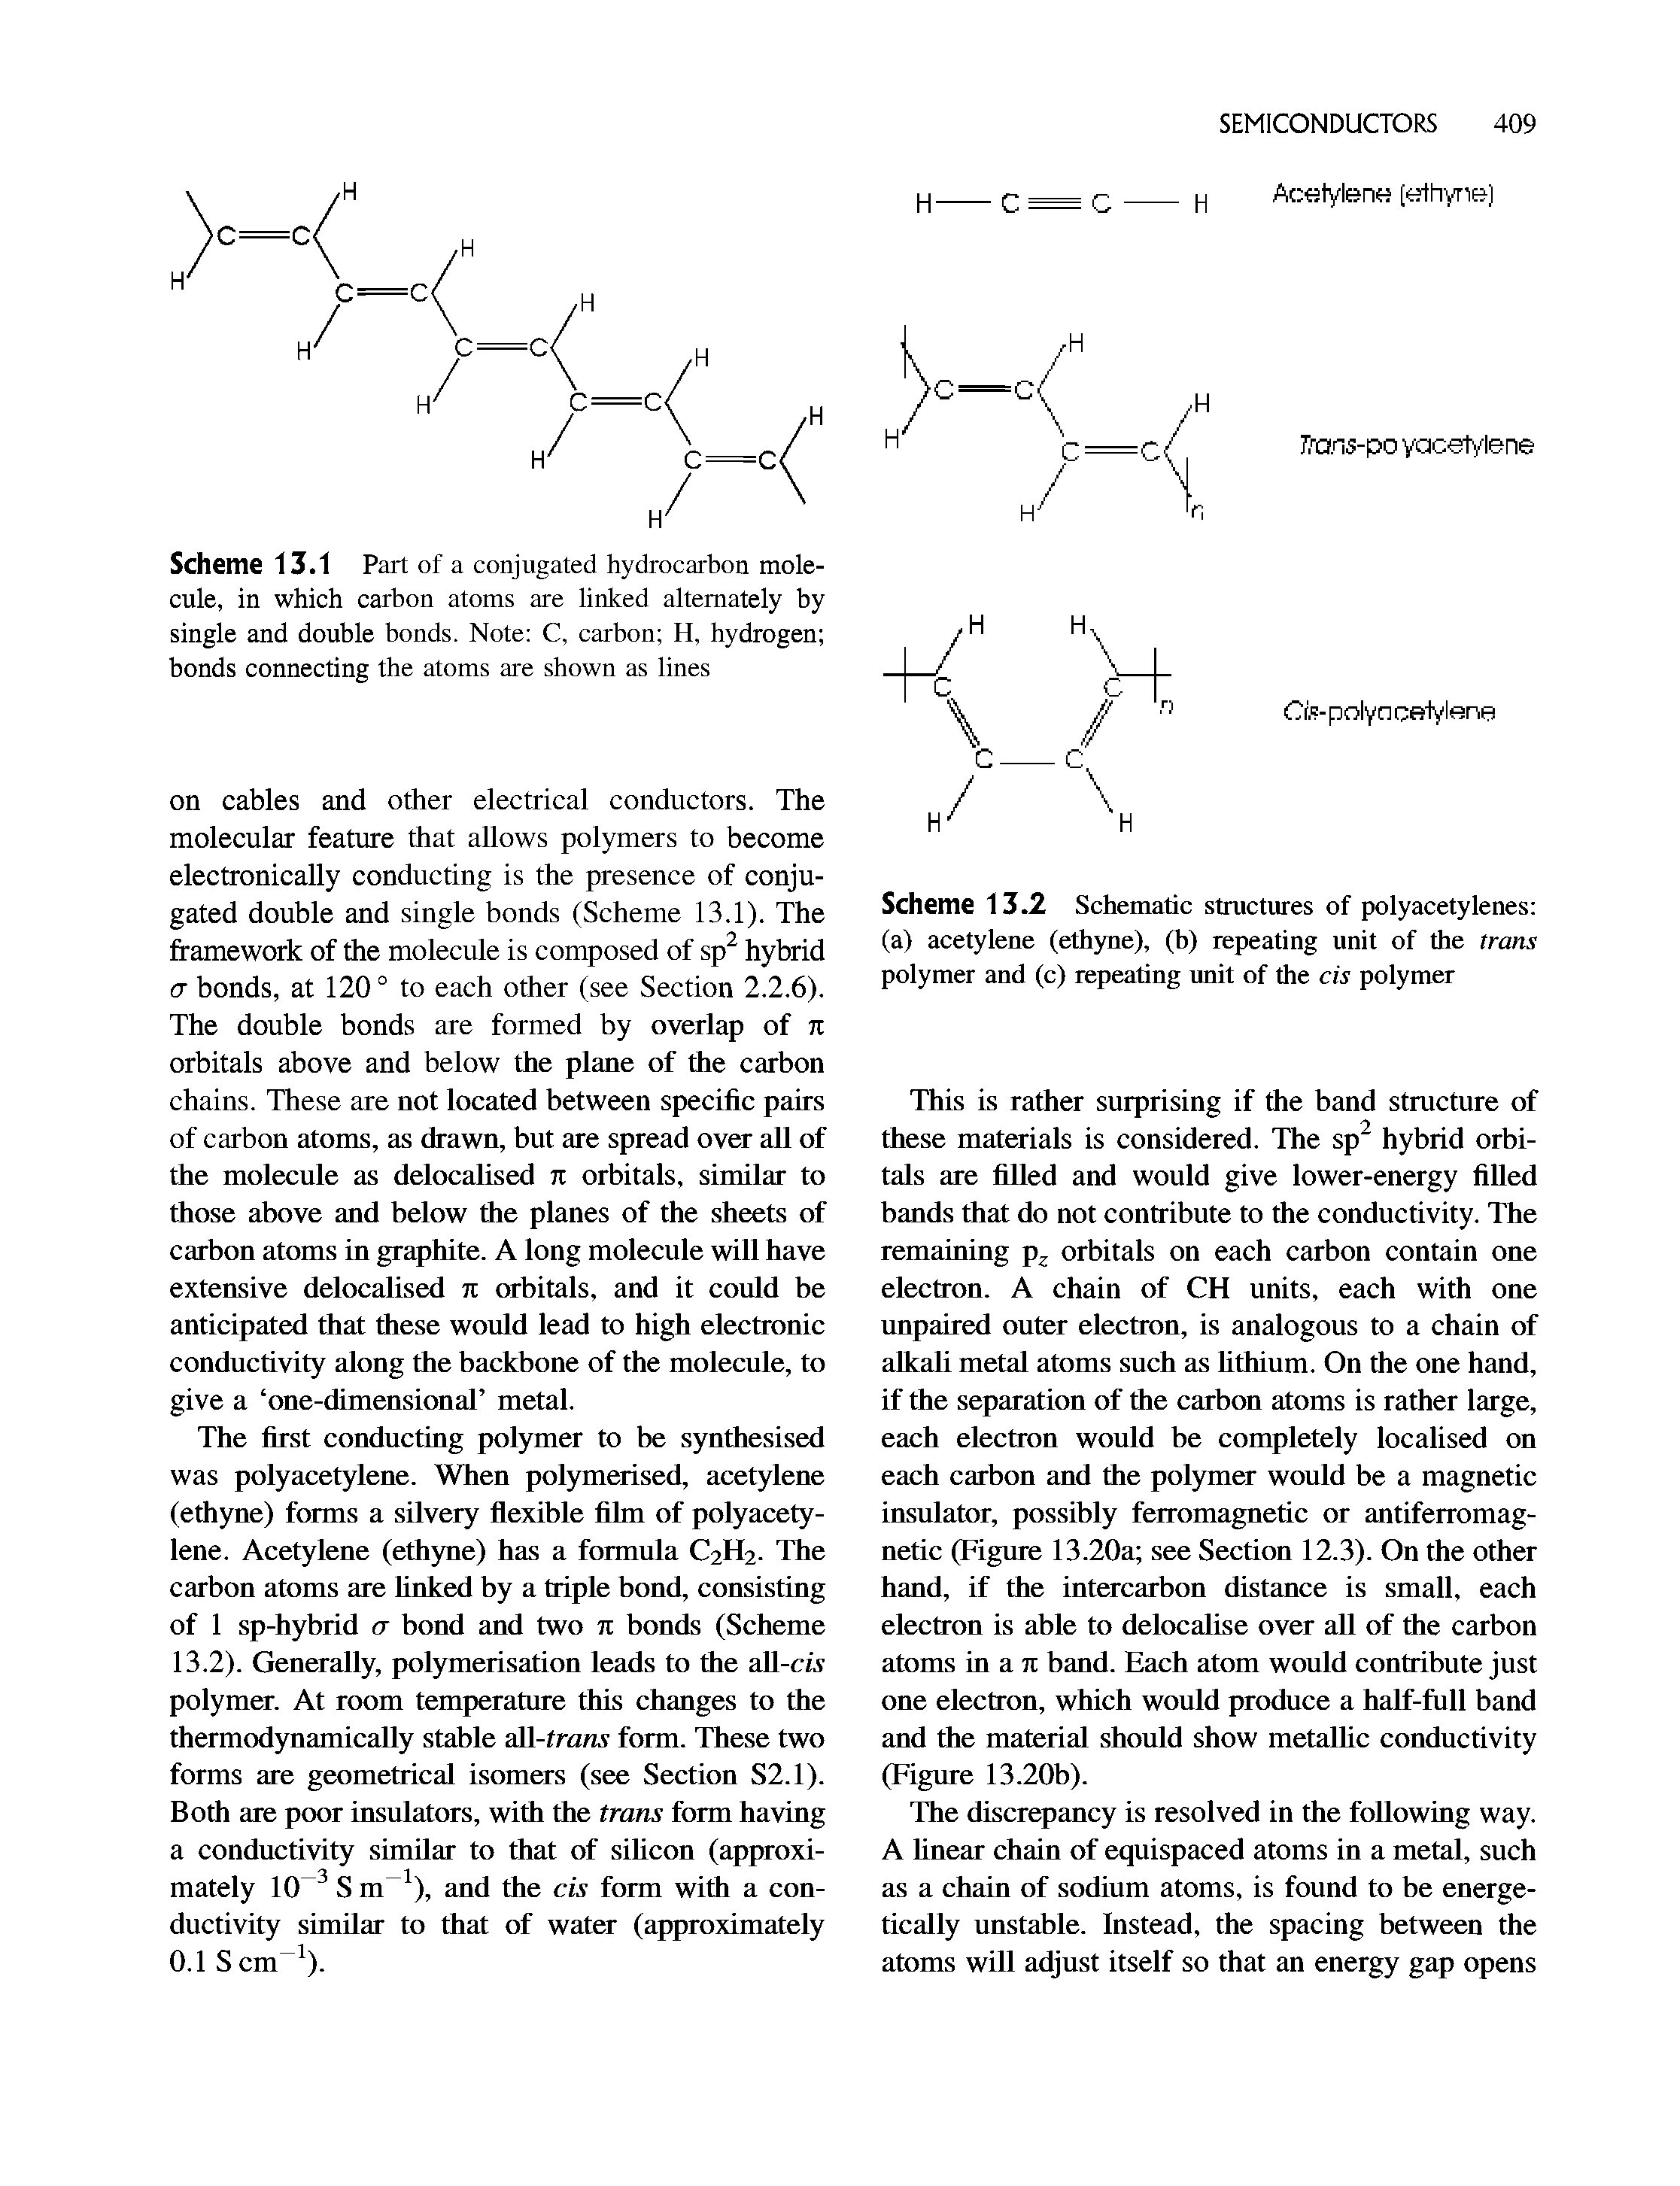 Scheme 13.2 Schematic structures of polyacetylenes (a) acetylene (ethyne), (h) repeating unit of the trans polymer and (c) repeating unit of the cis polymer...